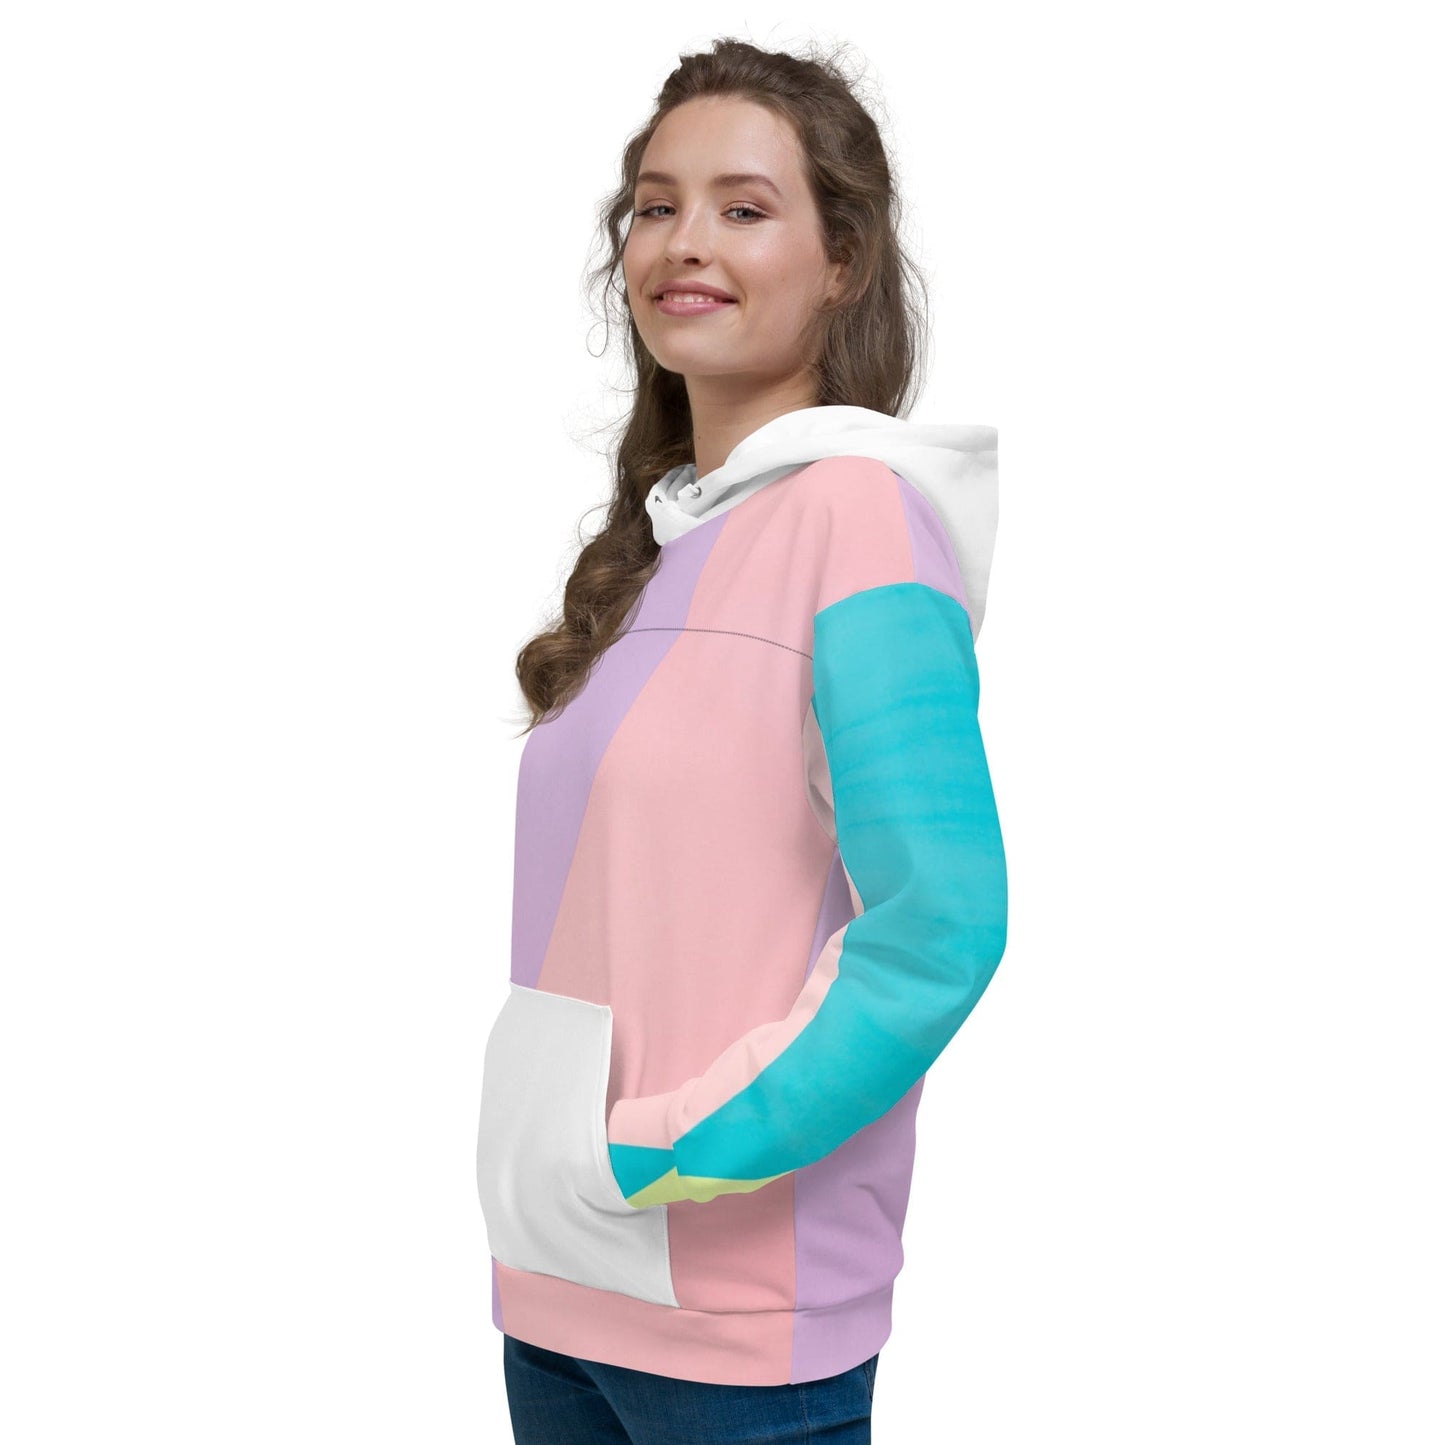 "Chic and Artsy Women's Pastel Colorblock Hoodie - Unique Style!" - AIBUYDESIGN